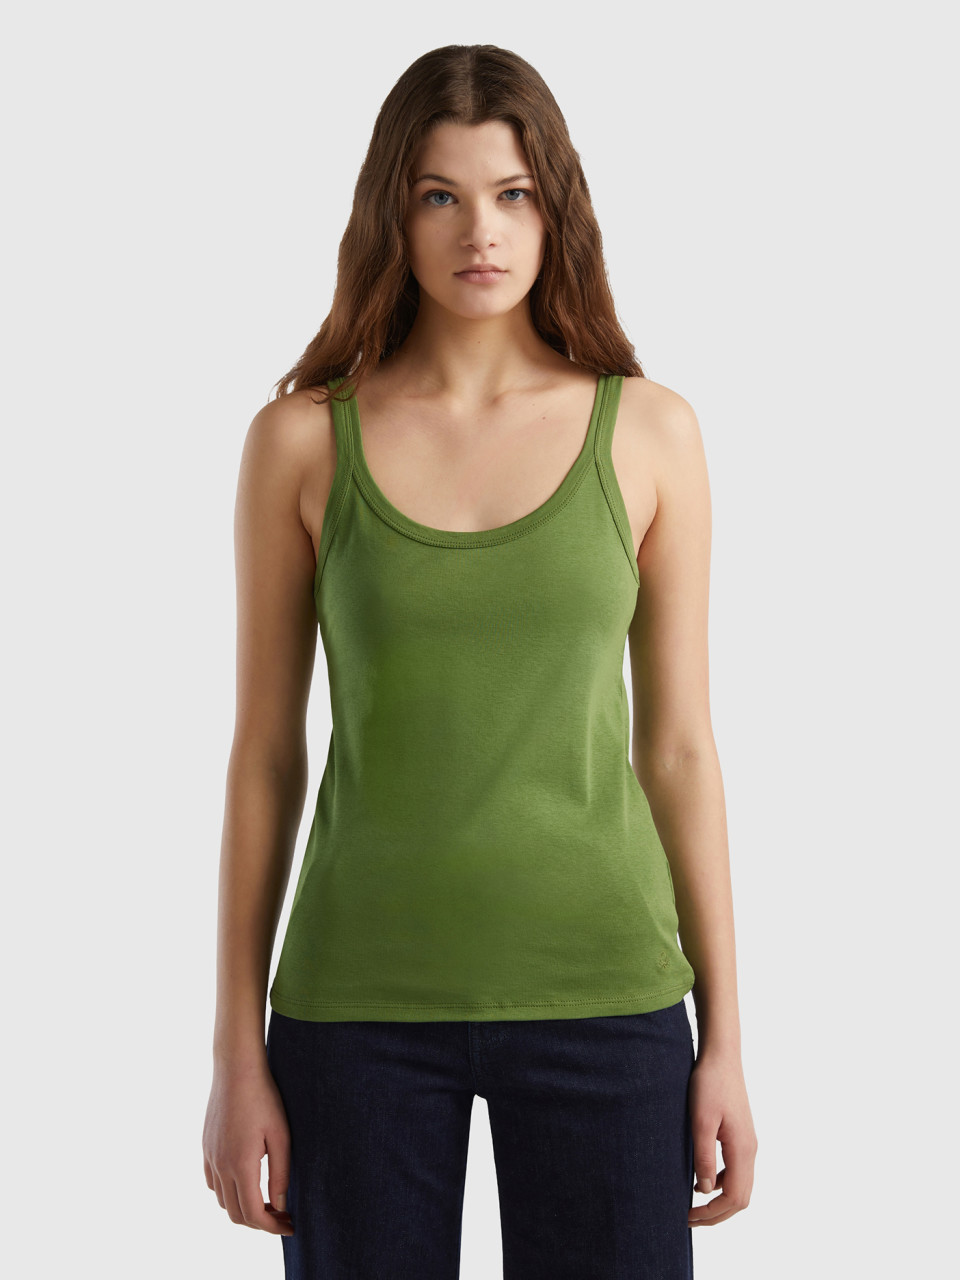 Benetton, Military Green Tank Top In Pure Cotton, Military Green, Women